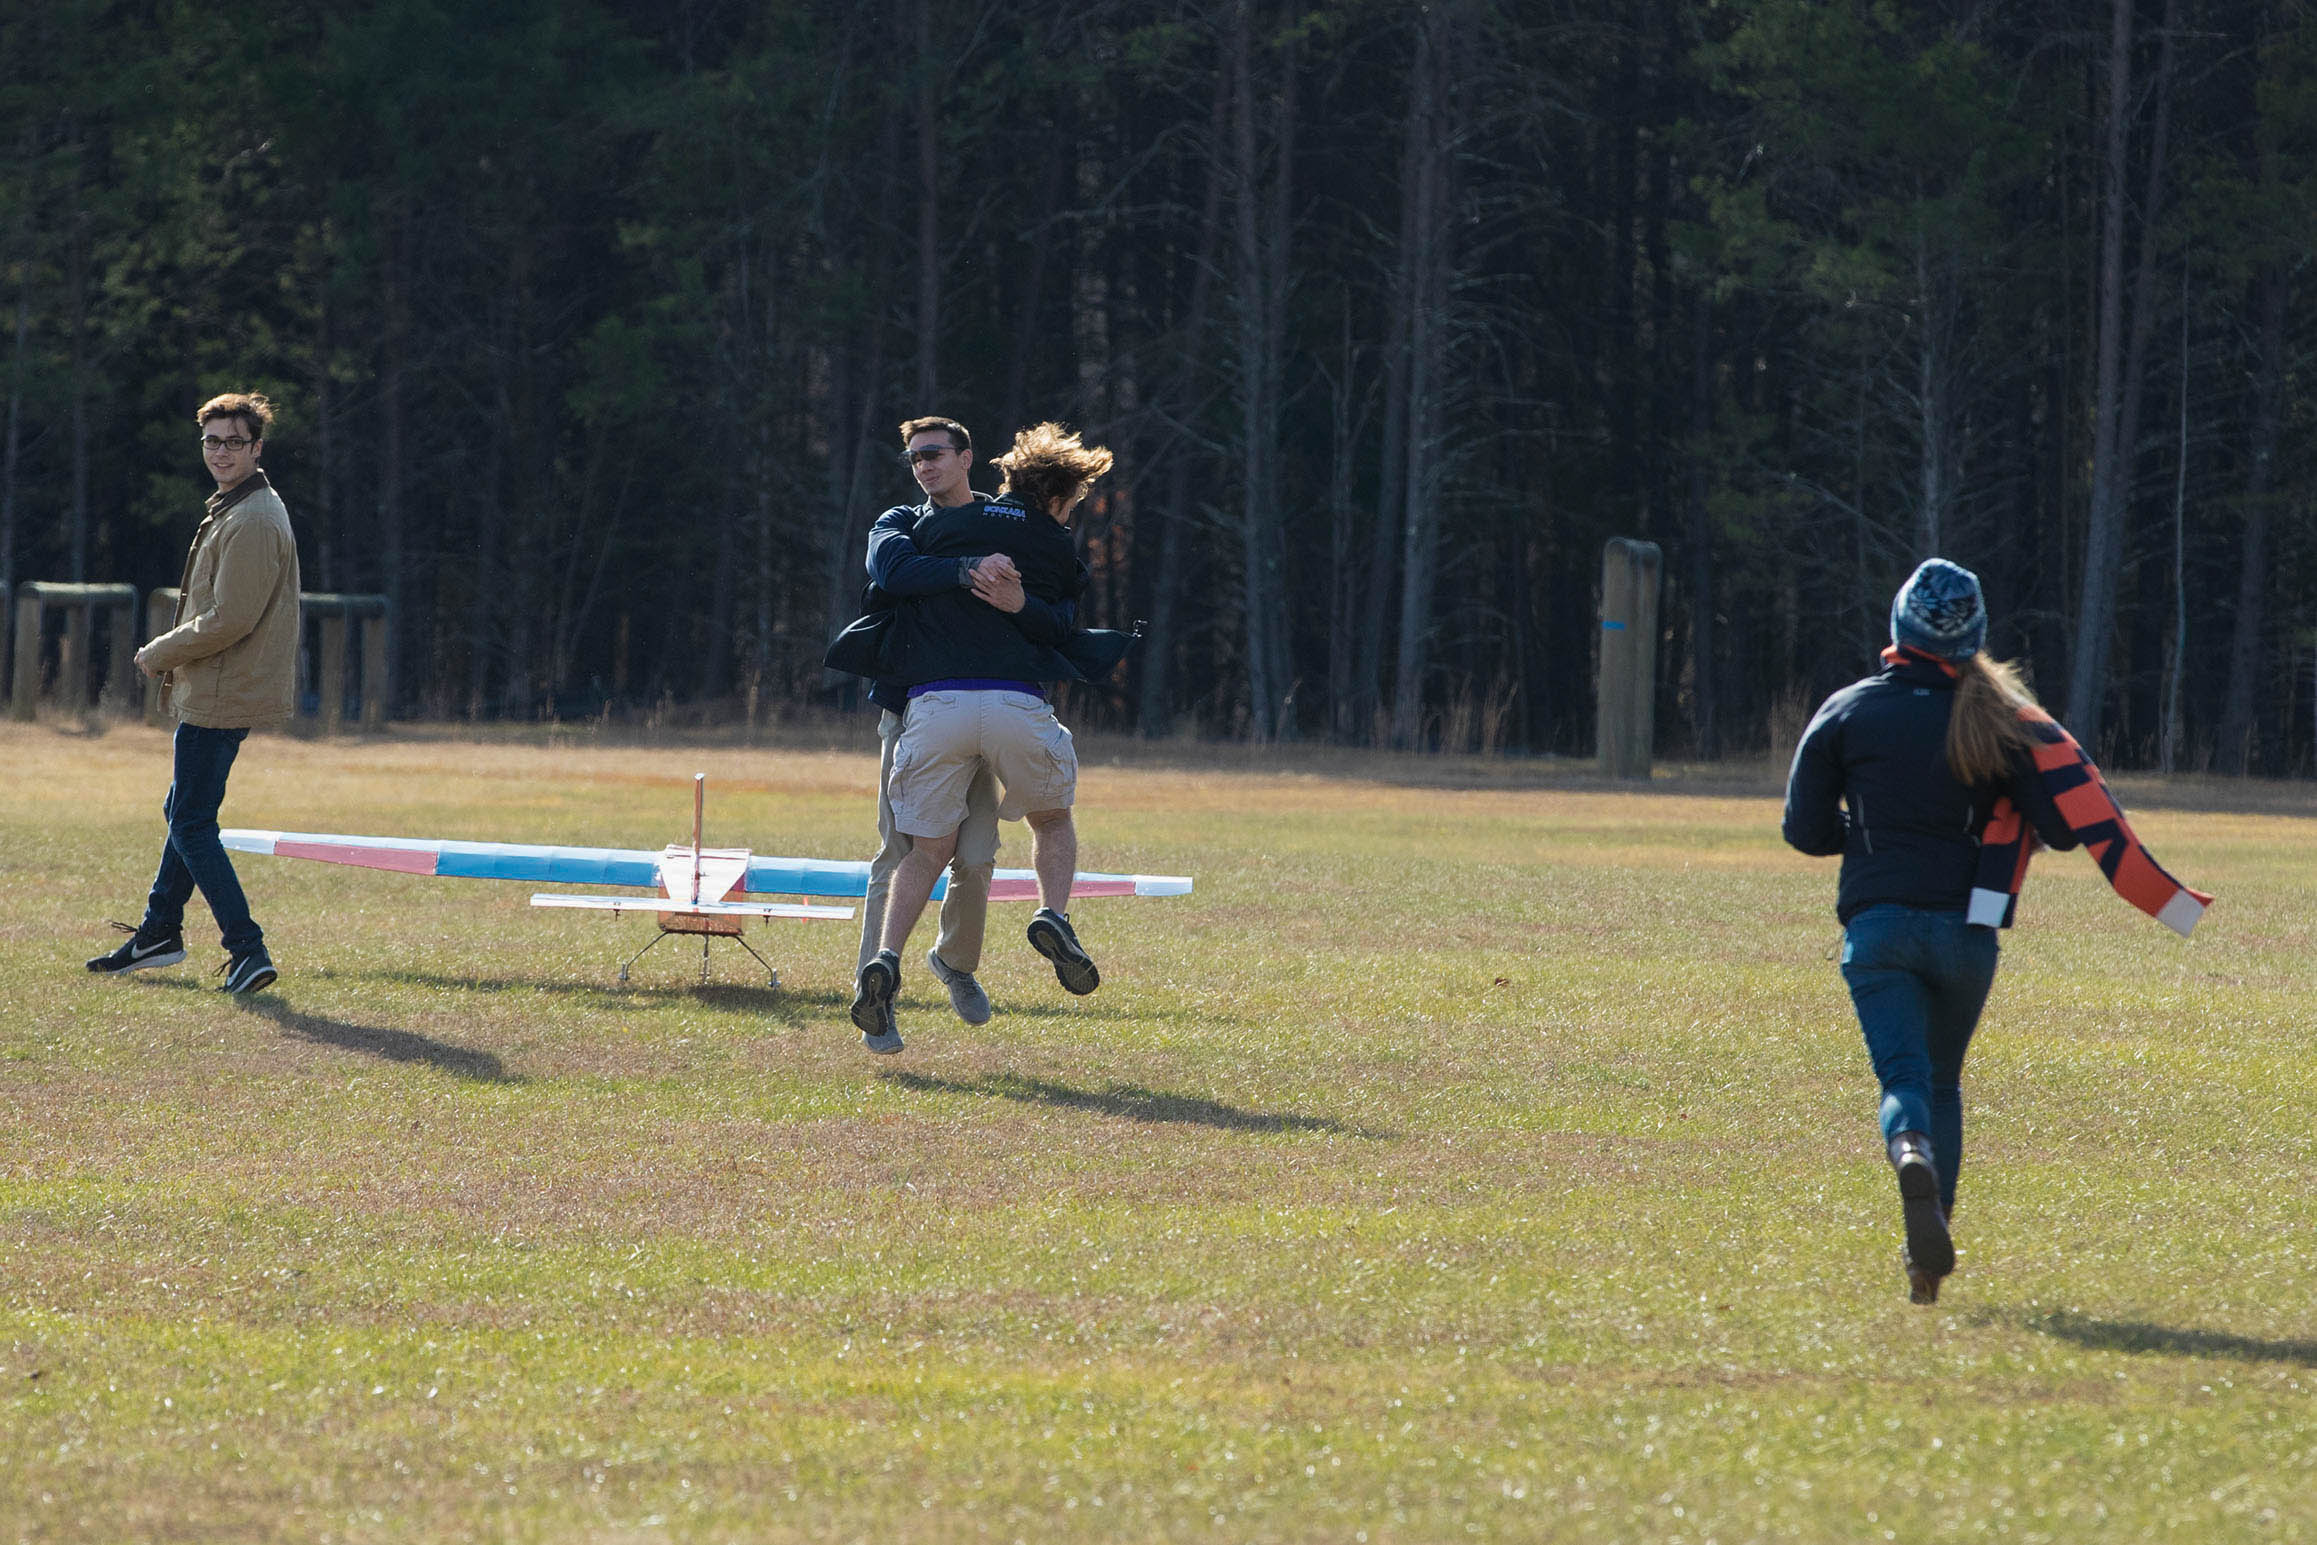 Ryan Keough and Andrew Metro hug in mid-air and Jack Shea, left, and Grace Vidlak run onto the field after a successful flight of their plane